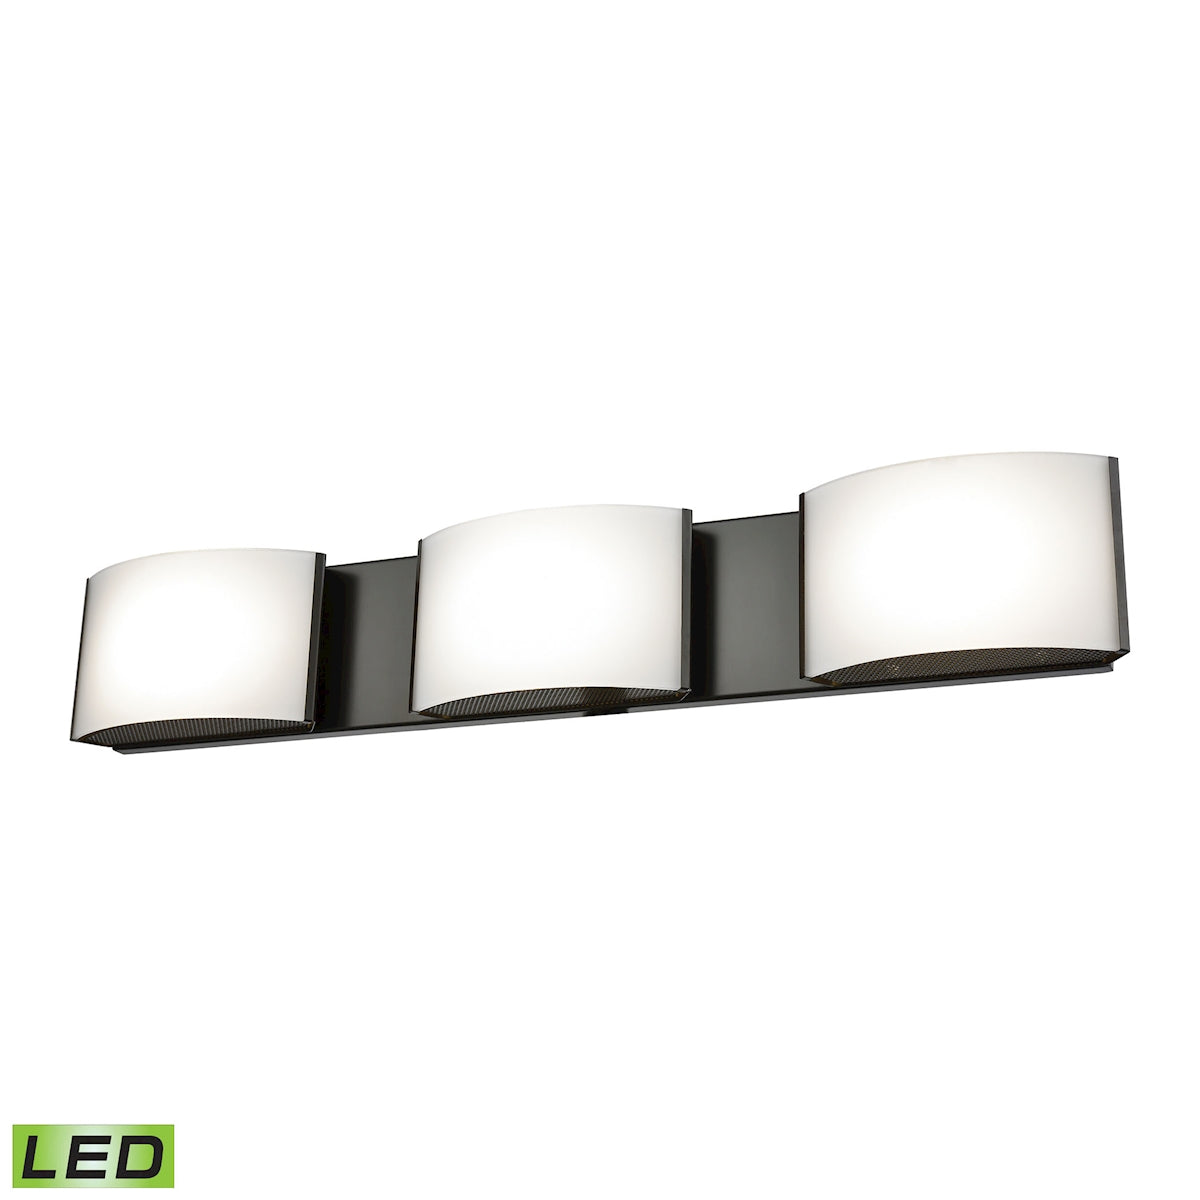 ELK Lighting BVL913-10-45 Pandora 3-Light Vanity Sconce in Oiled Bronze with Opal Glass - Integrated LED